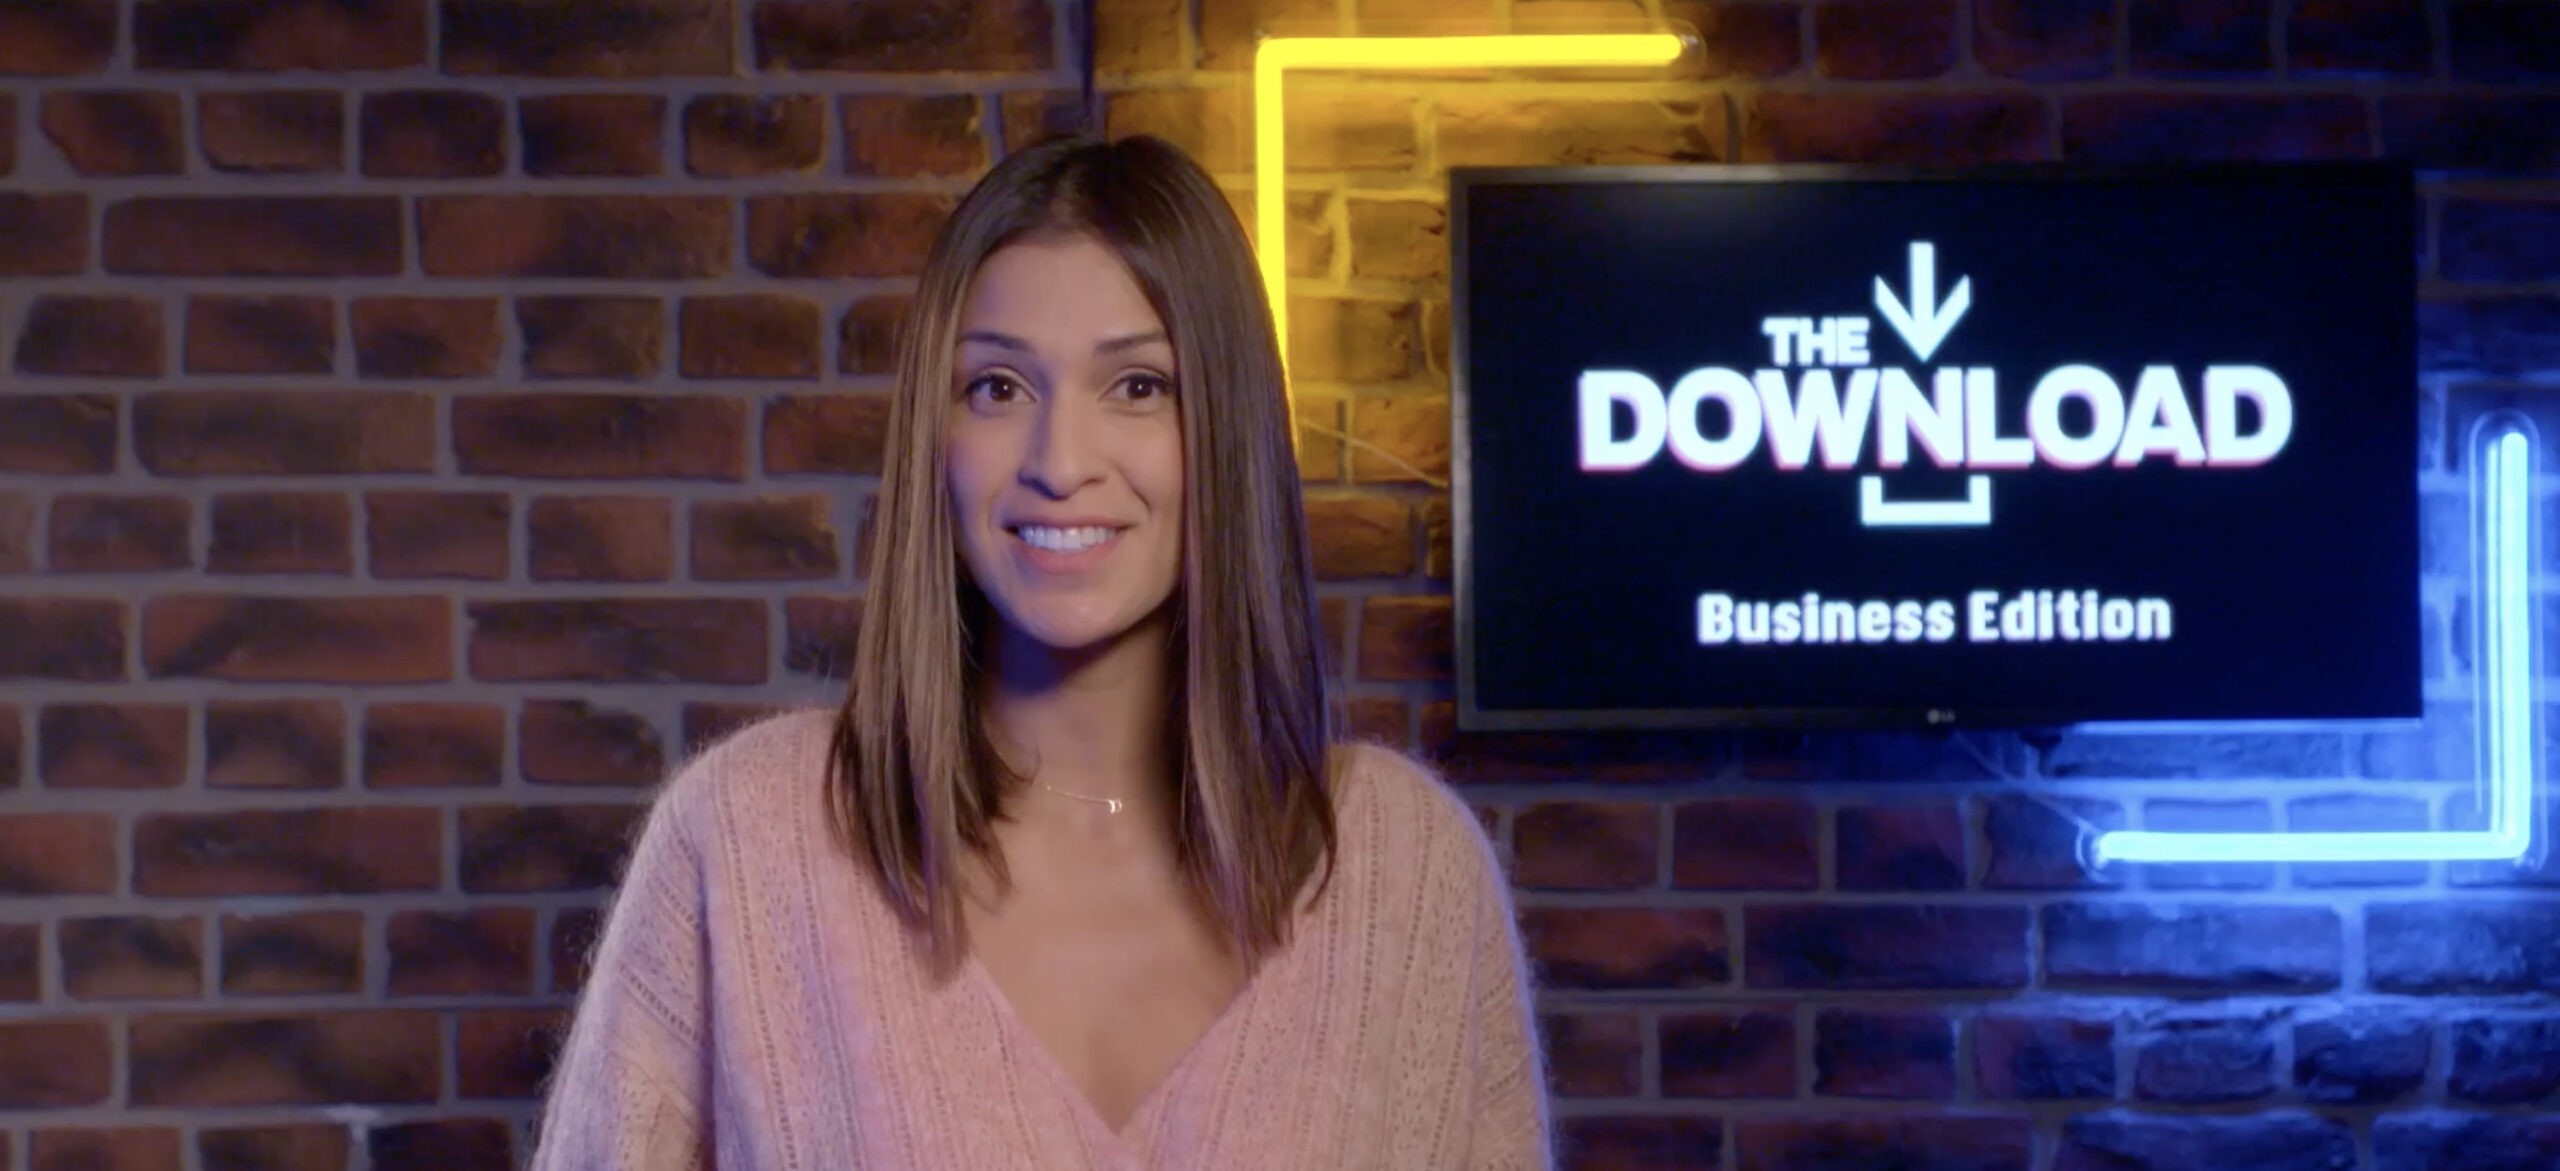 The Latest Episode of The Download: Business Edition